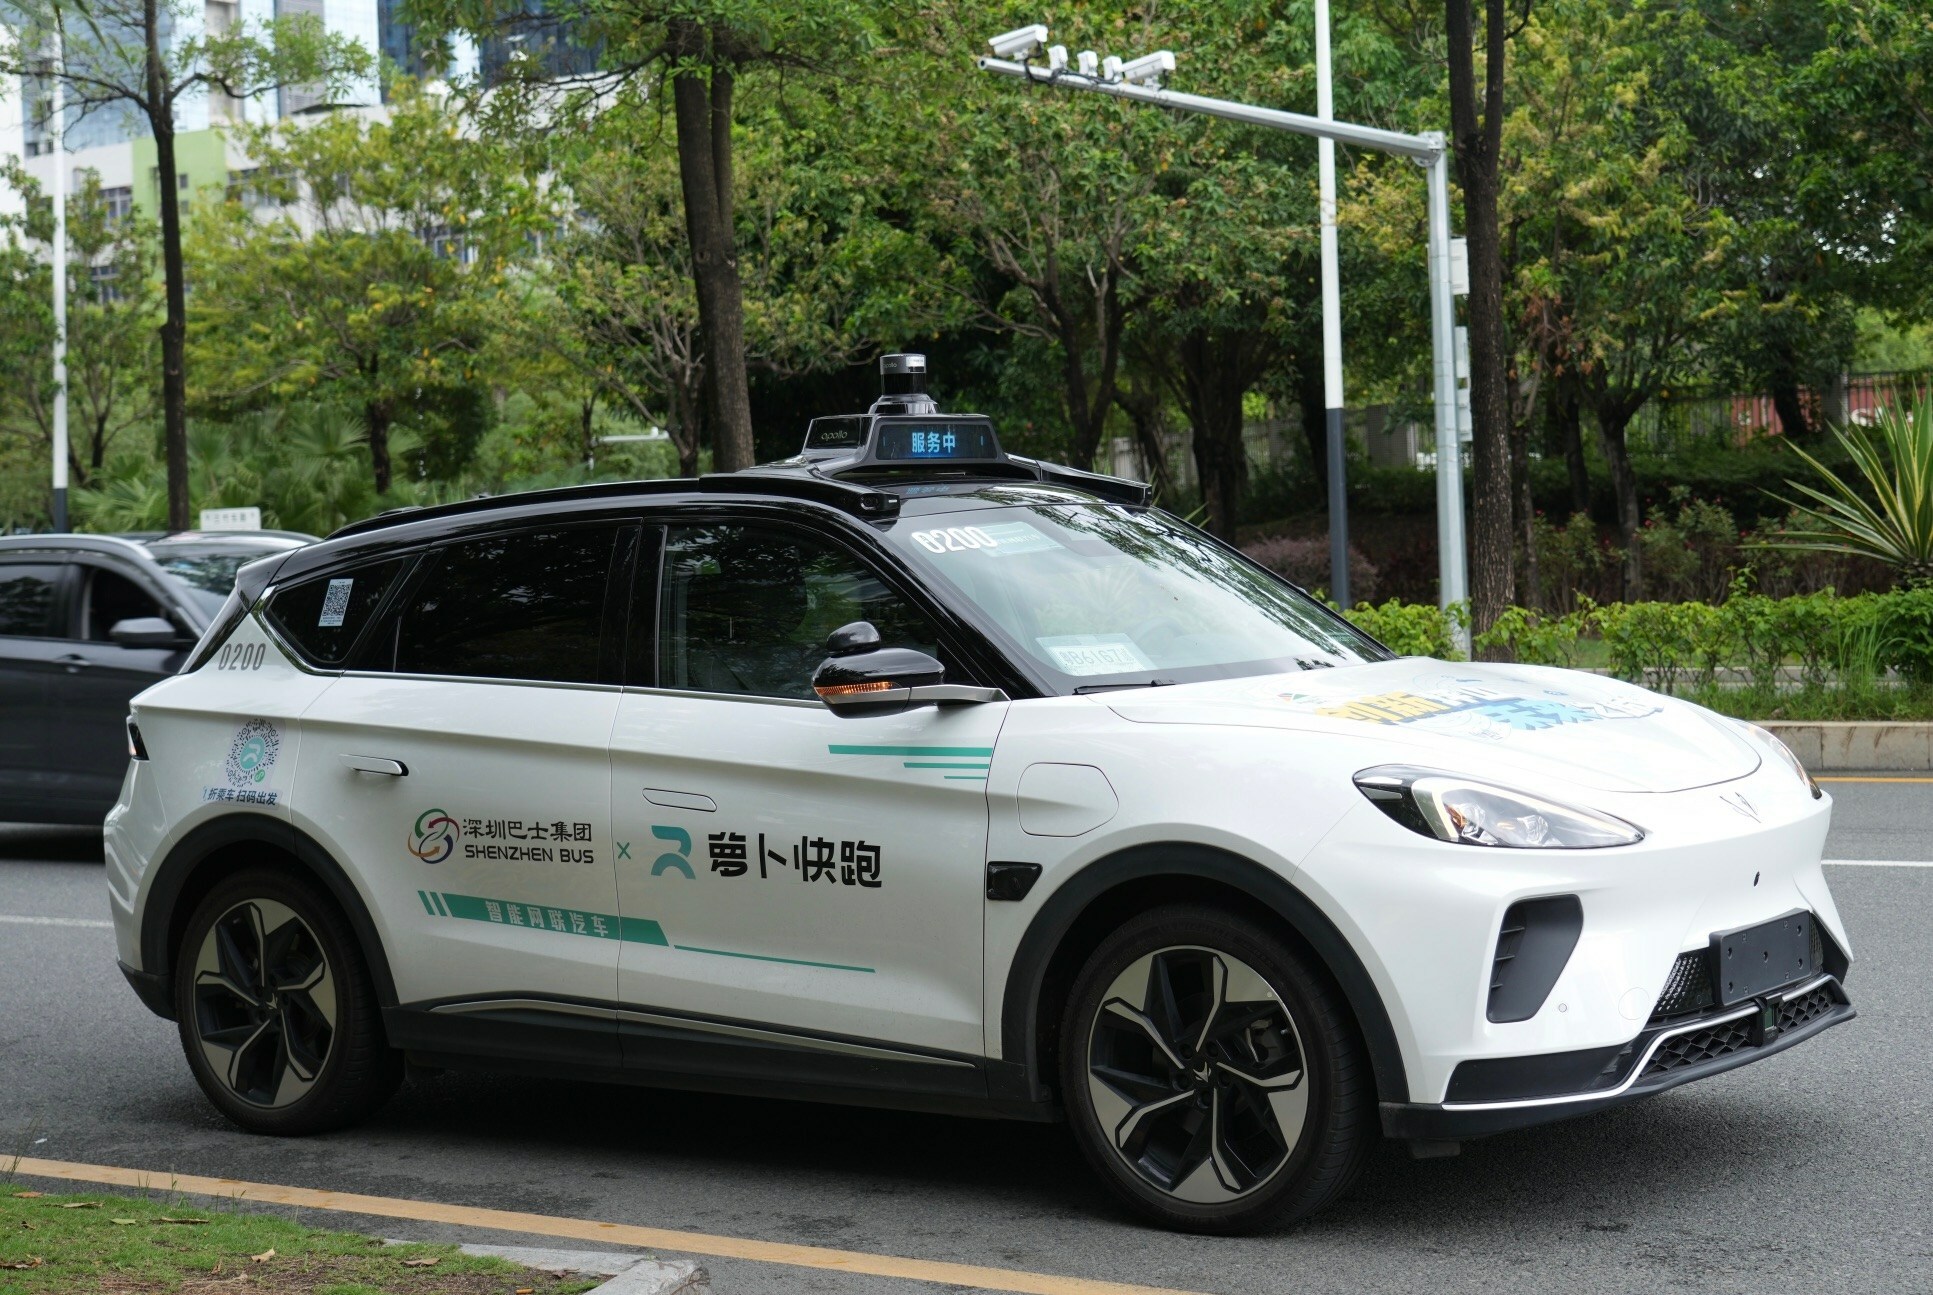 Baidu Launches Commercial Fully Driverless Ride-Hailing Service in Shenzhen